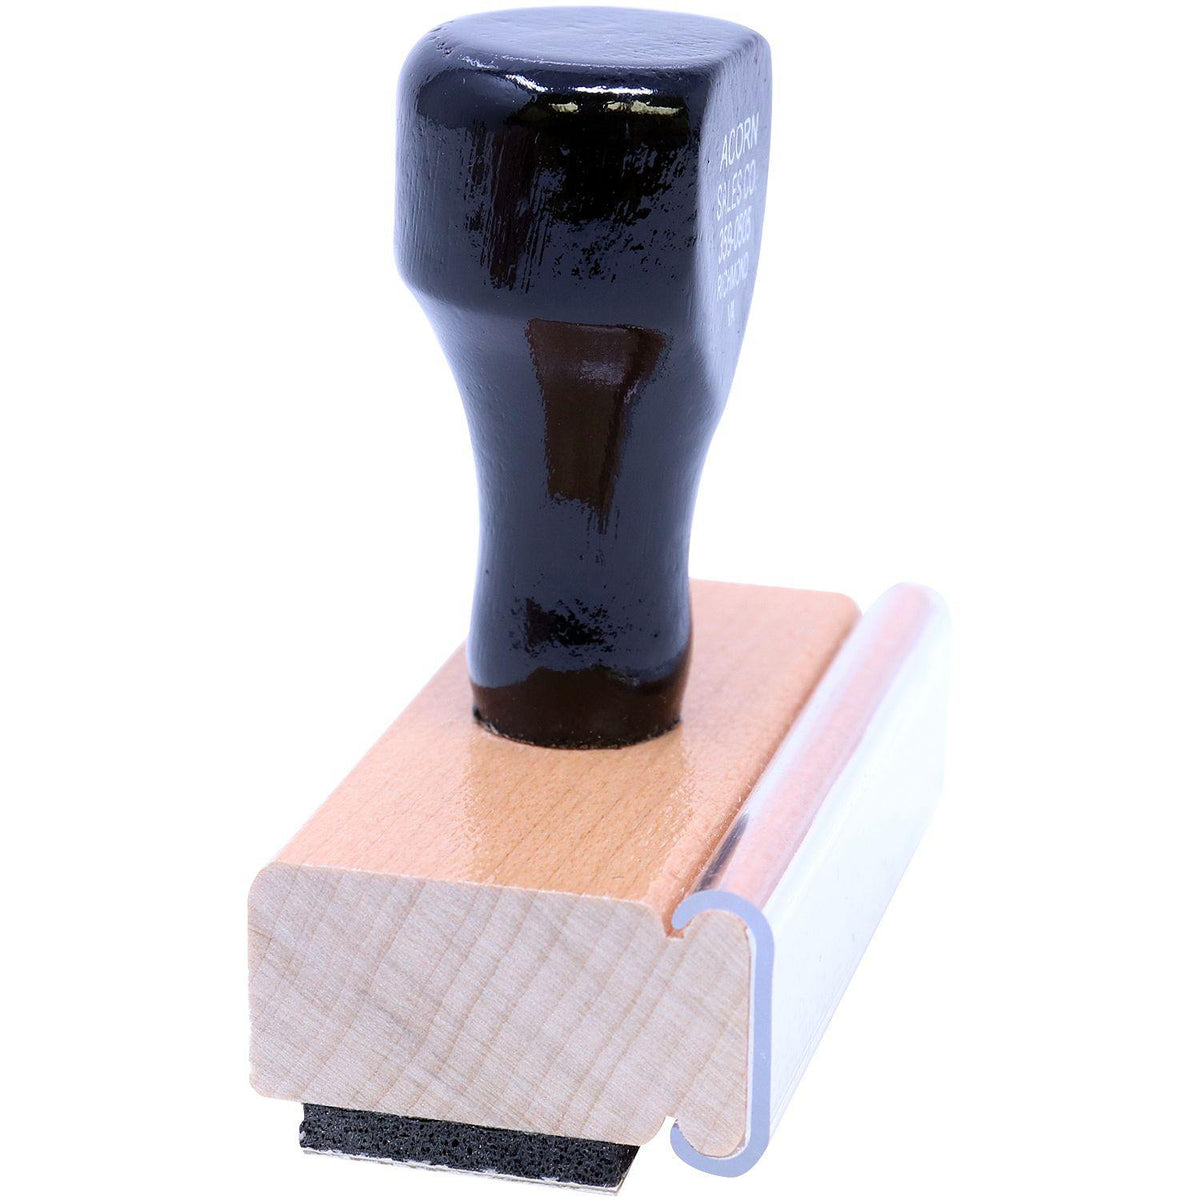 Large Way To Go Rubber Stamp - Engineer Seal Stamps - Brand_Acorn, Impression Size_Large, Stamp Type_Regular Stamp, Type of Use_Teacher